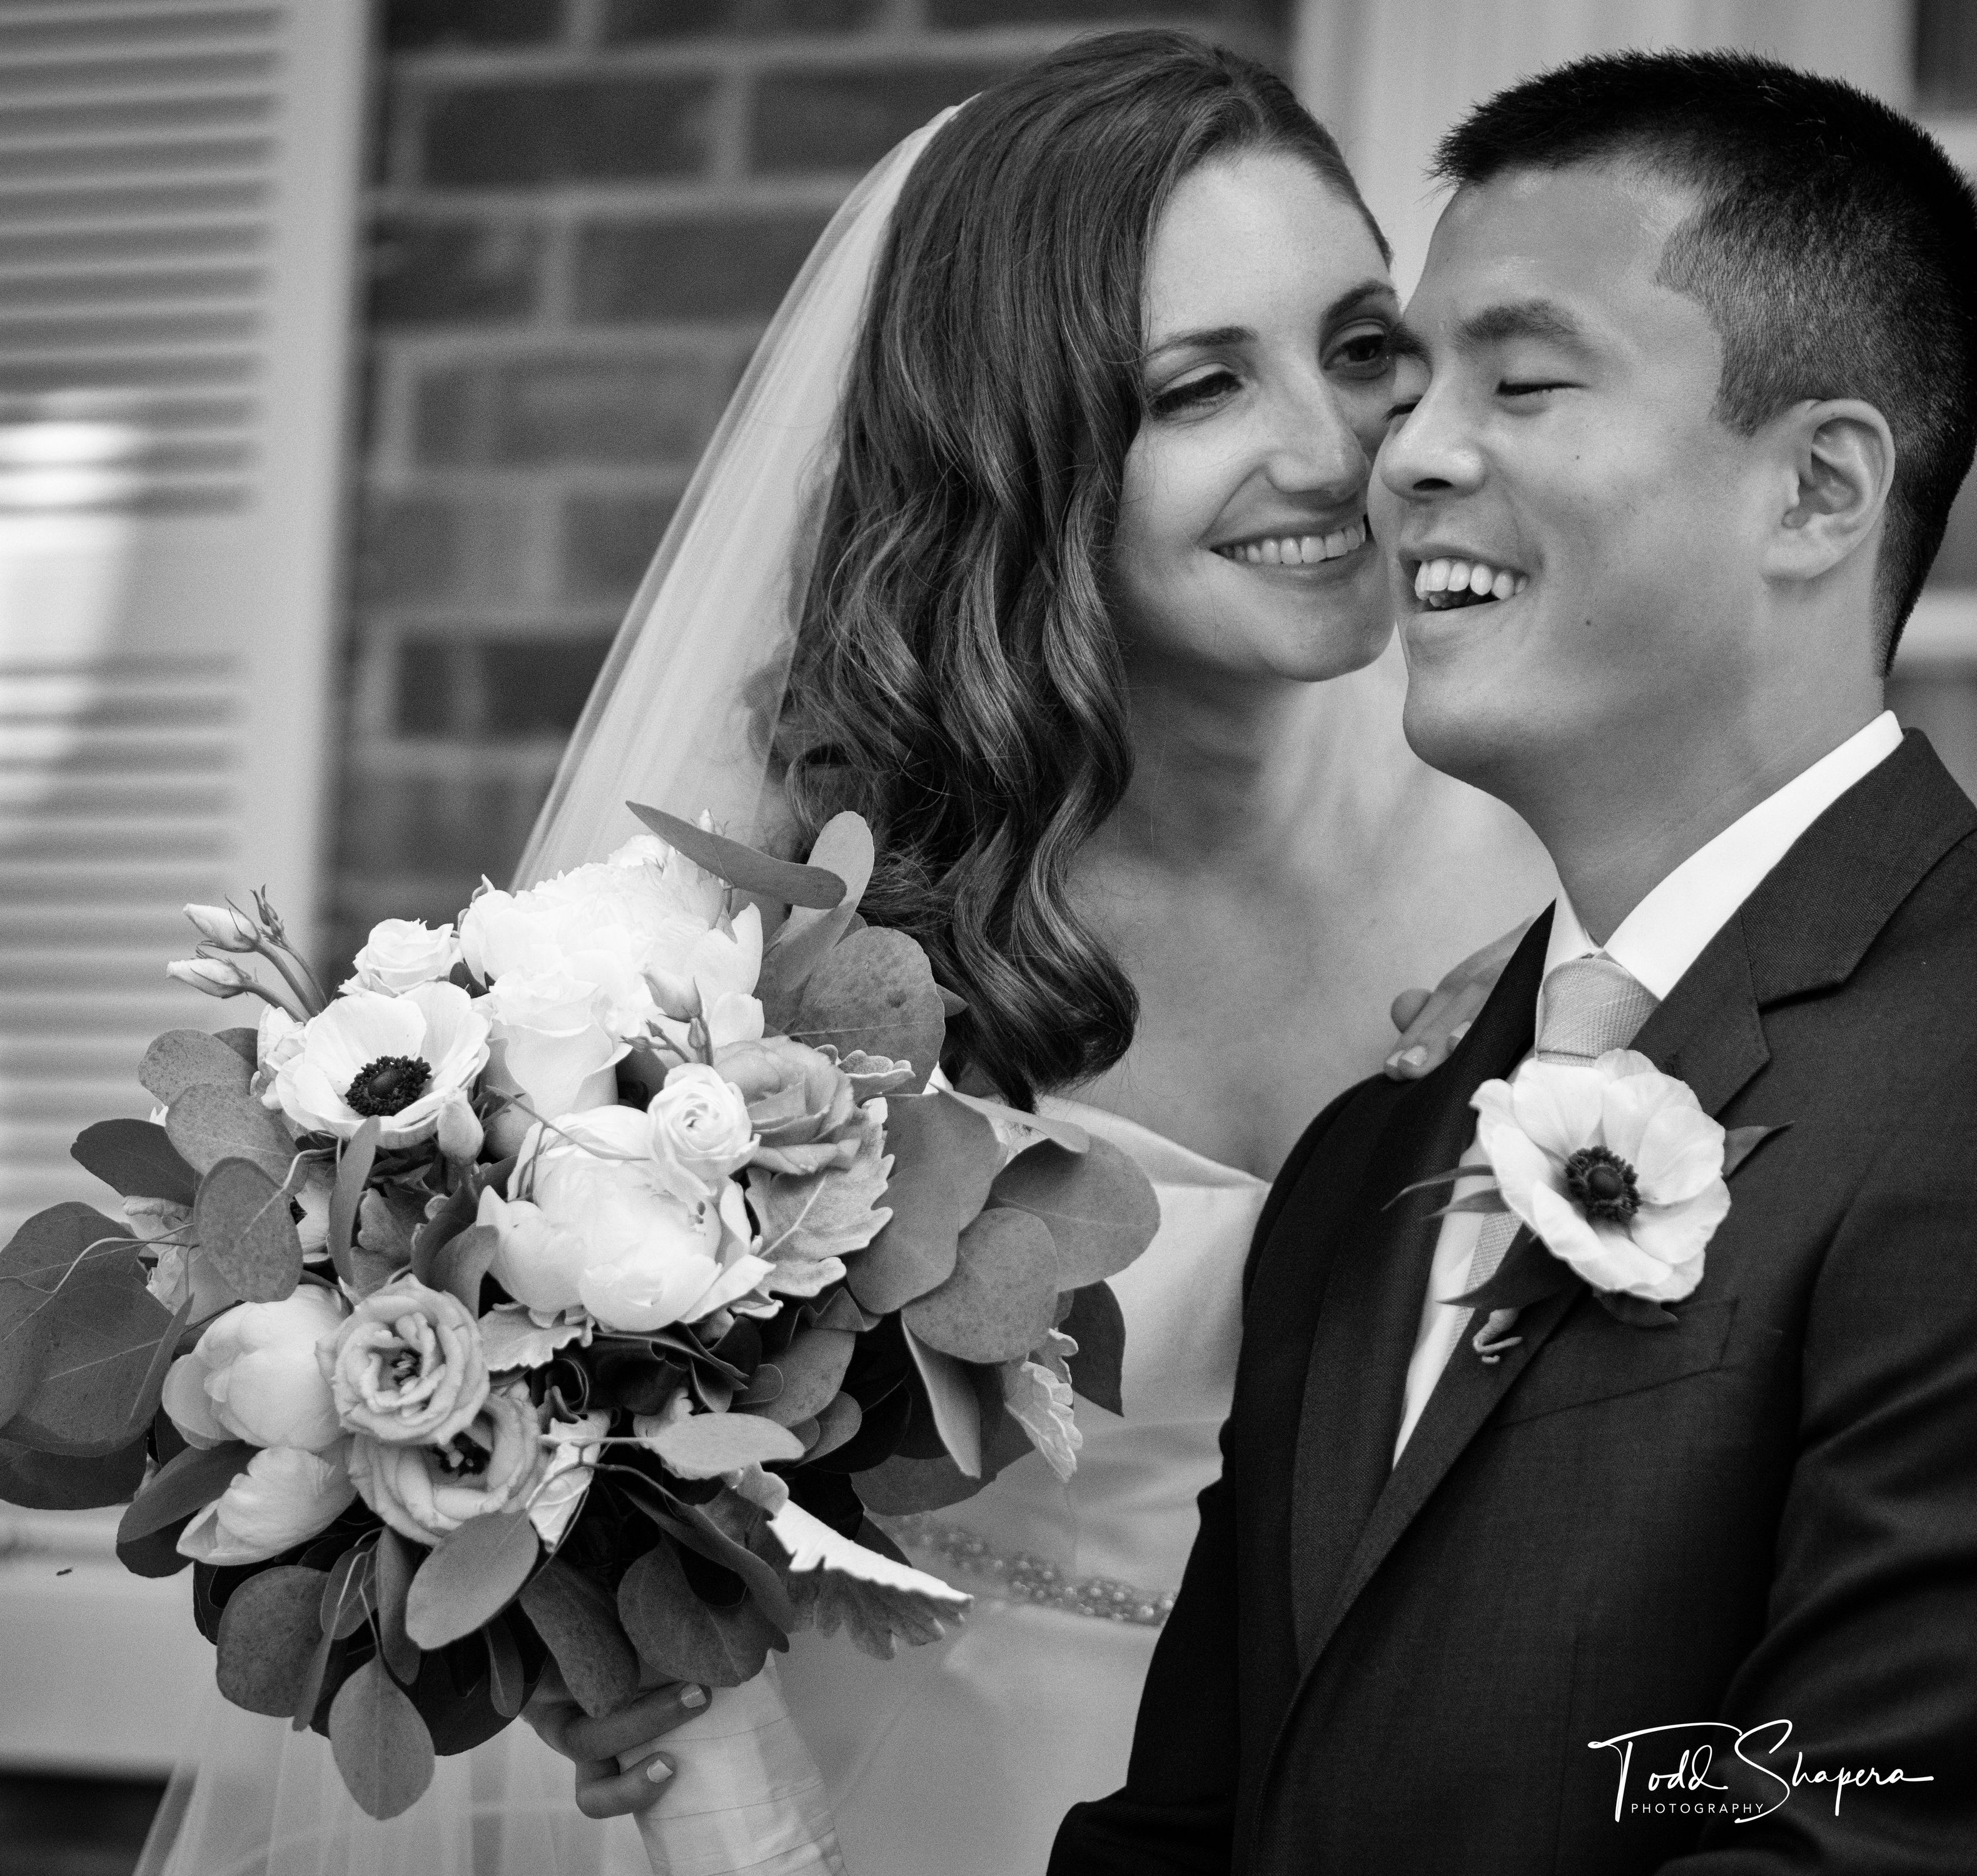 An Intimate, Happy Moment For The Bride and Groom